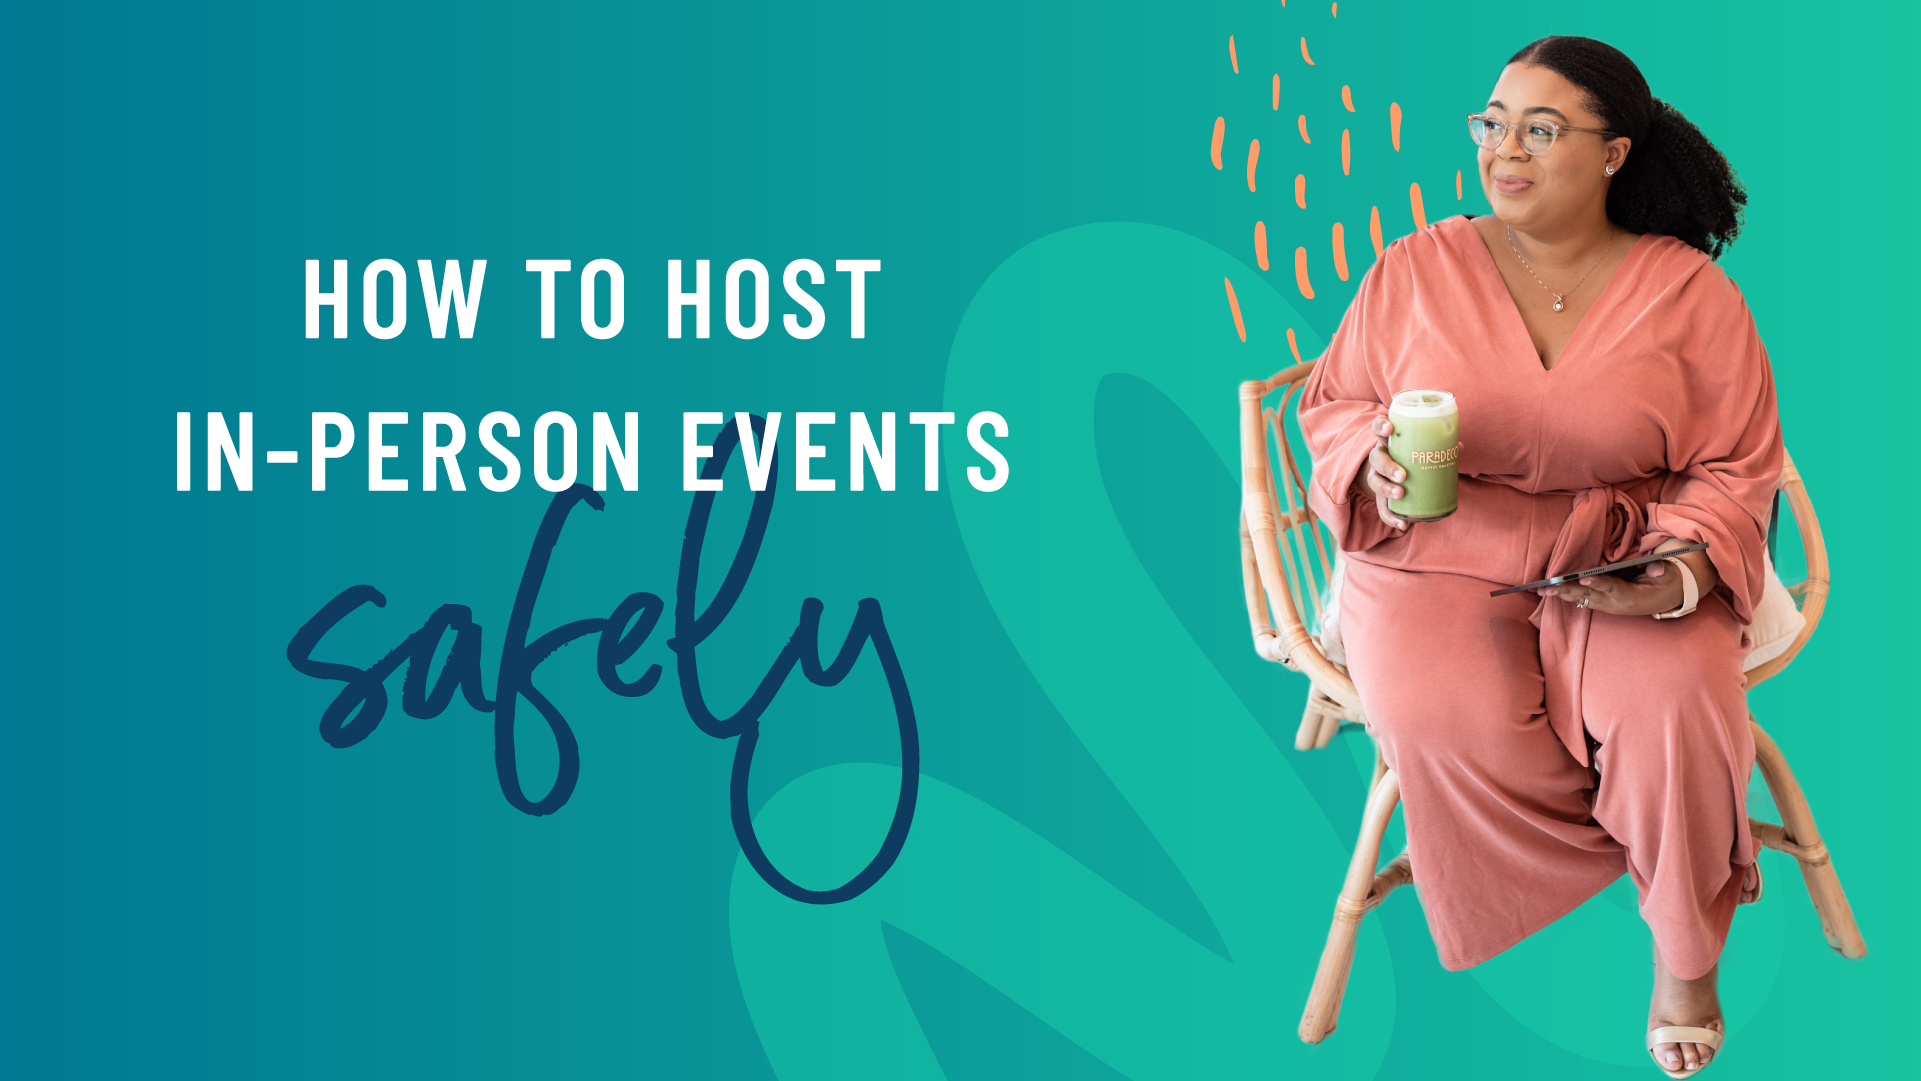 How to Host In-Person Events Safely (and Legally)